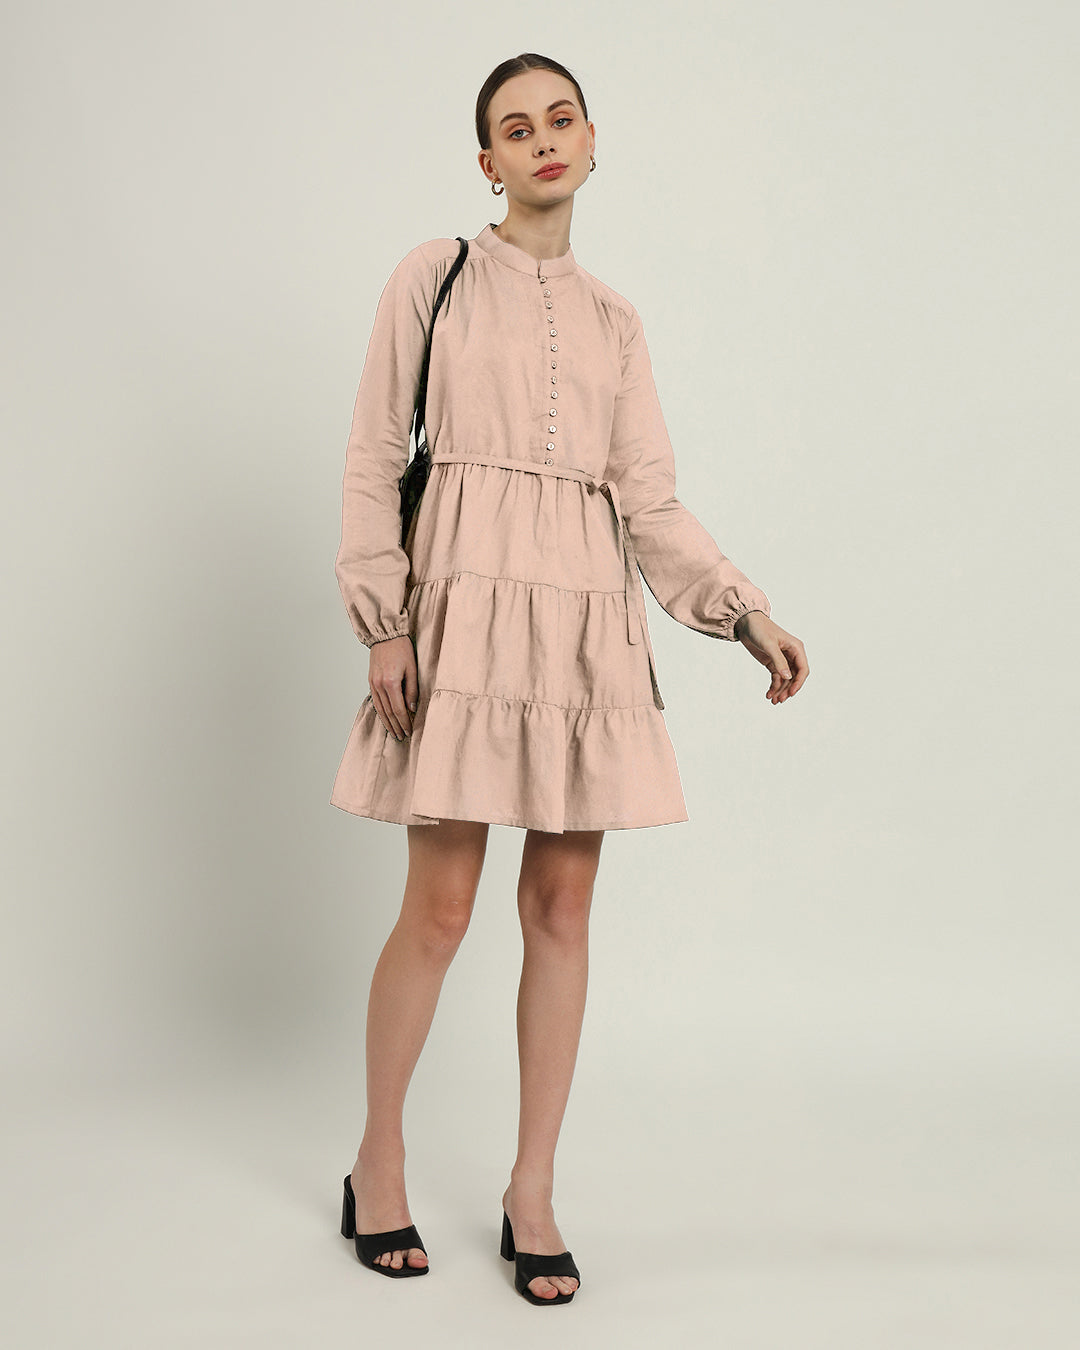 The Ely Daisy Bisque Linen Dress